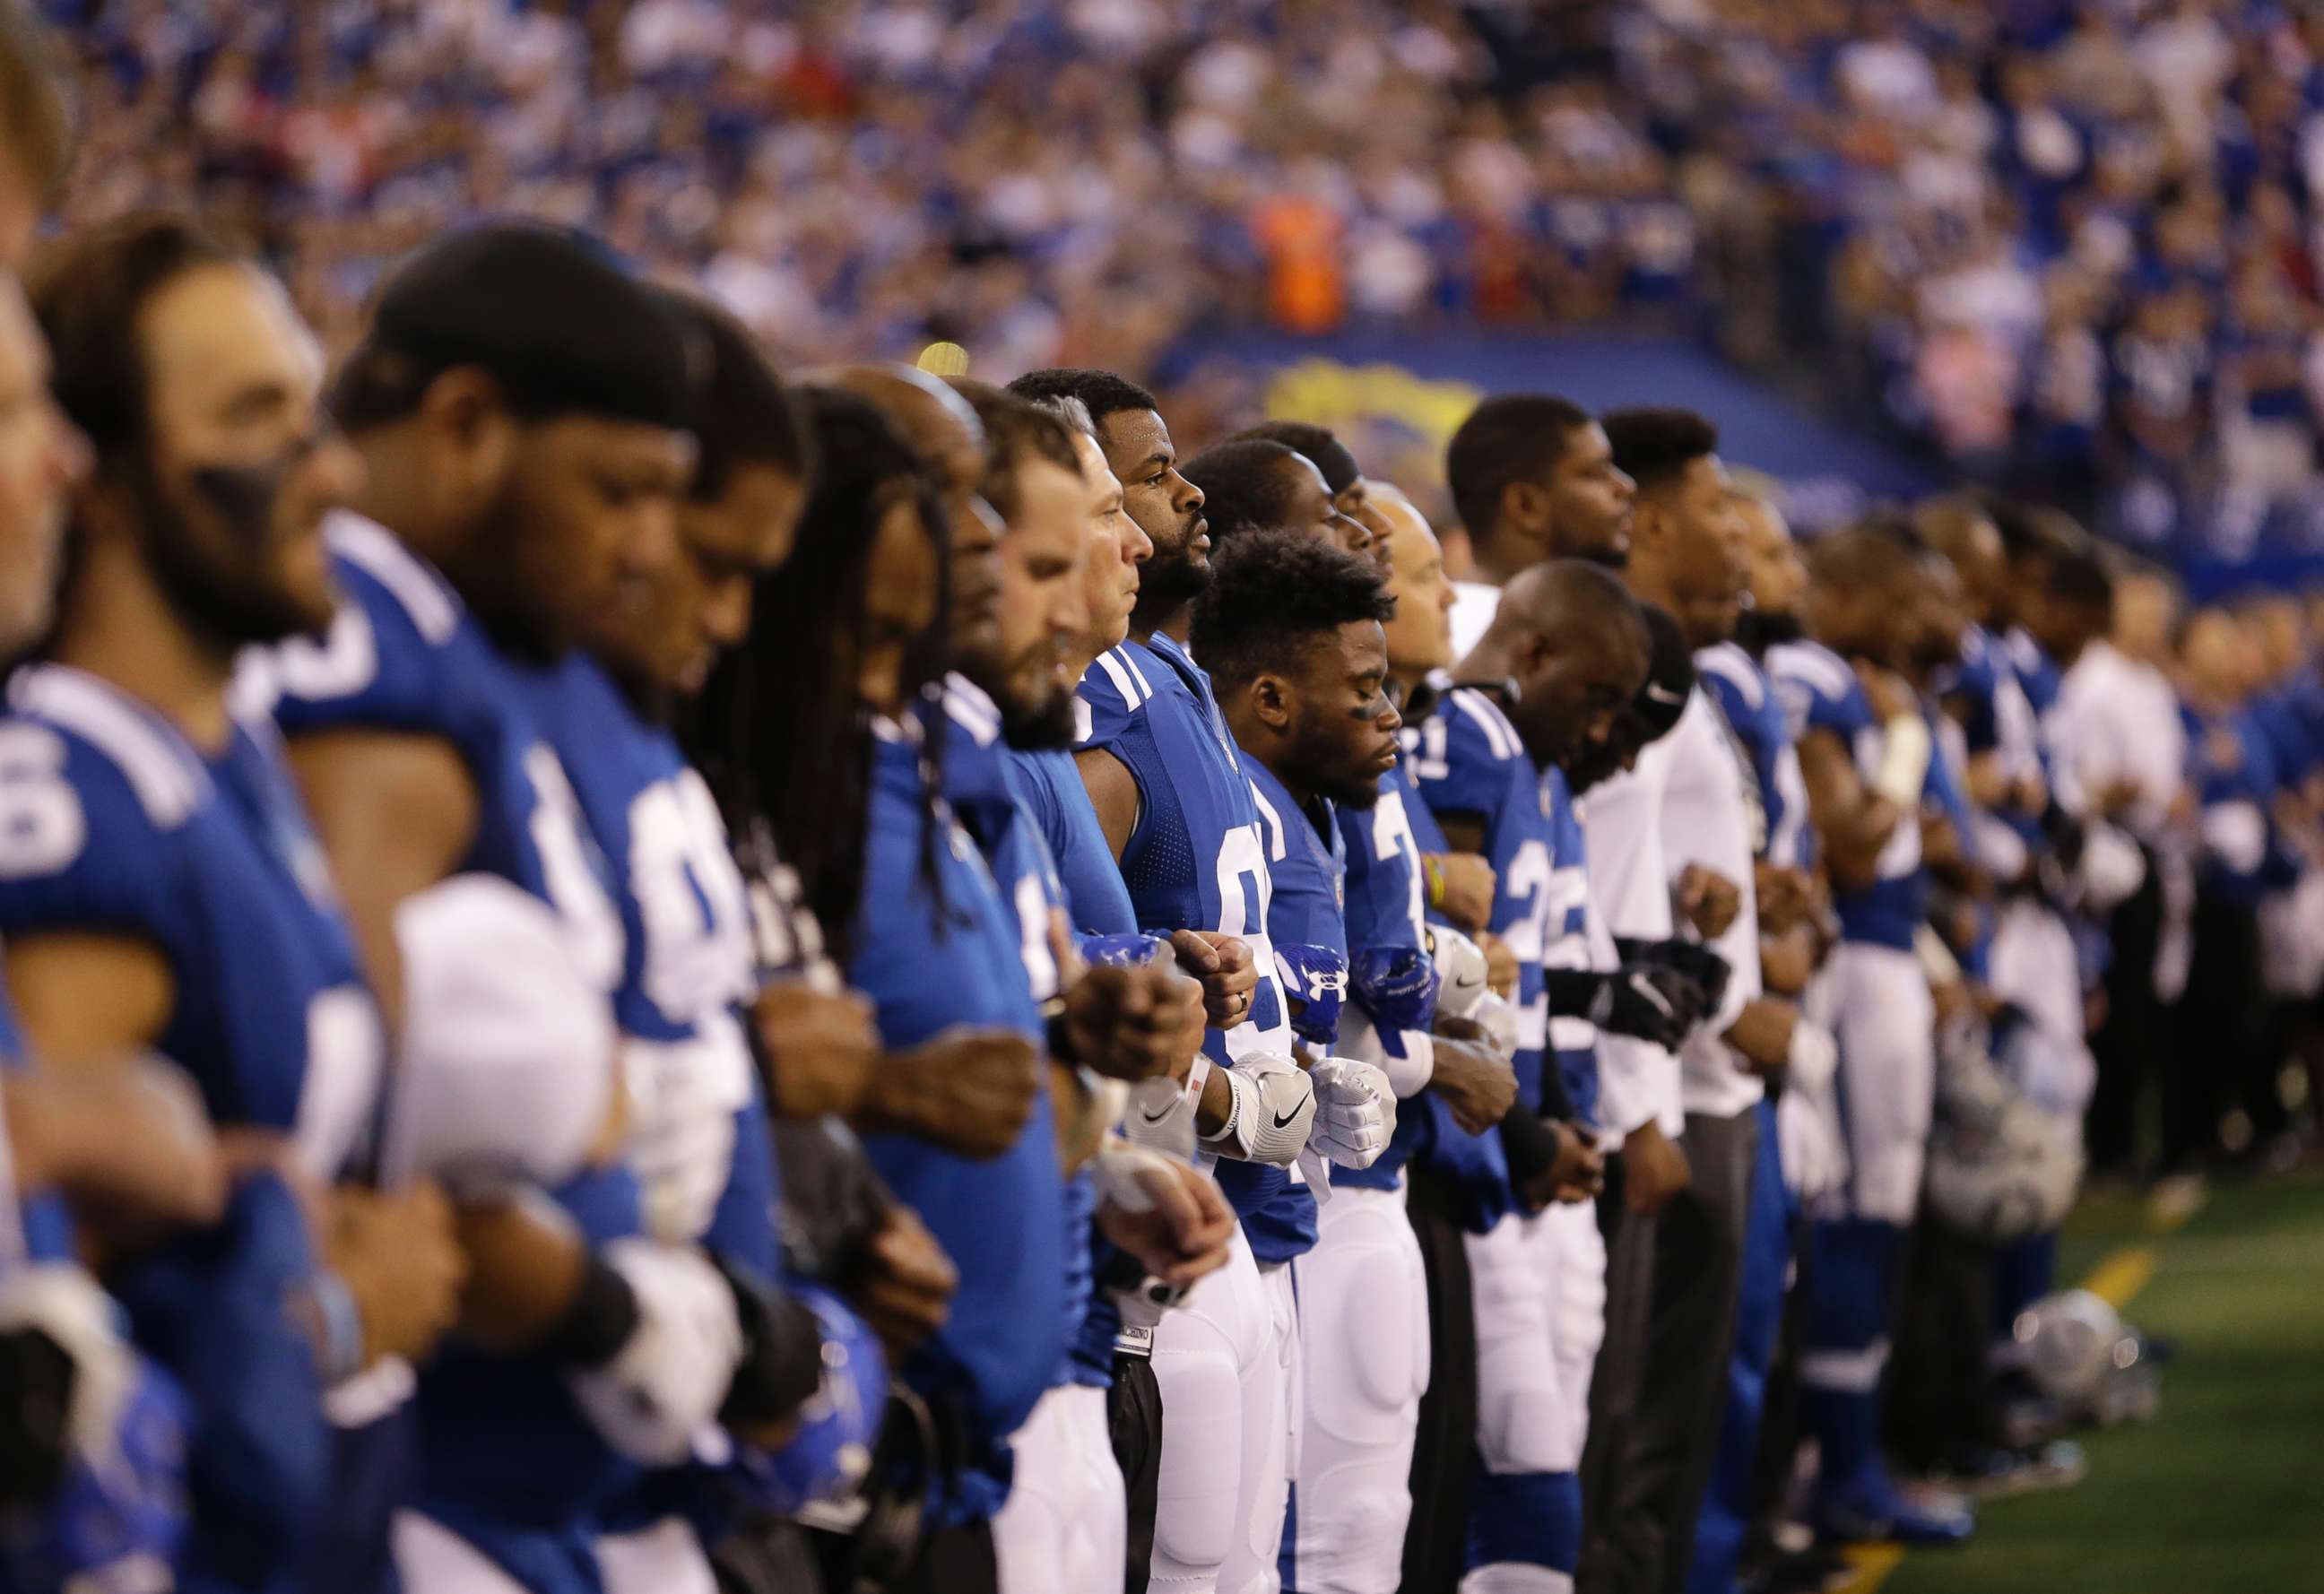 PHOTO: Members of the Indianapolis Colts lock arms during the playing of the national anthem before an NFL football game against the San Francisco 49ers, Oct. 8, 2017, in Indianapolis.